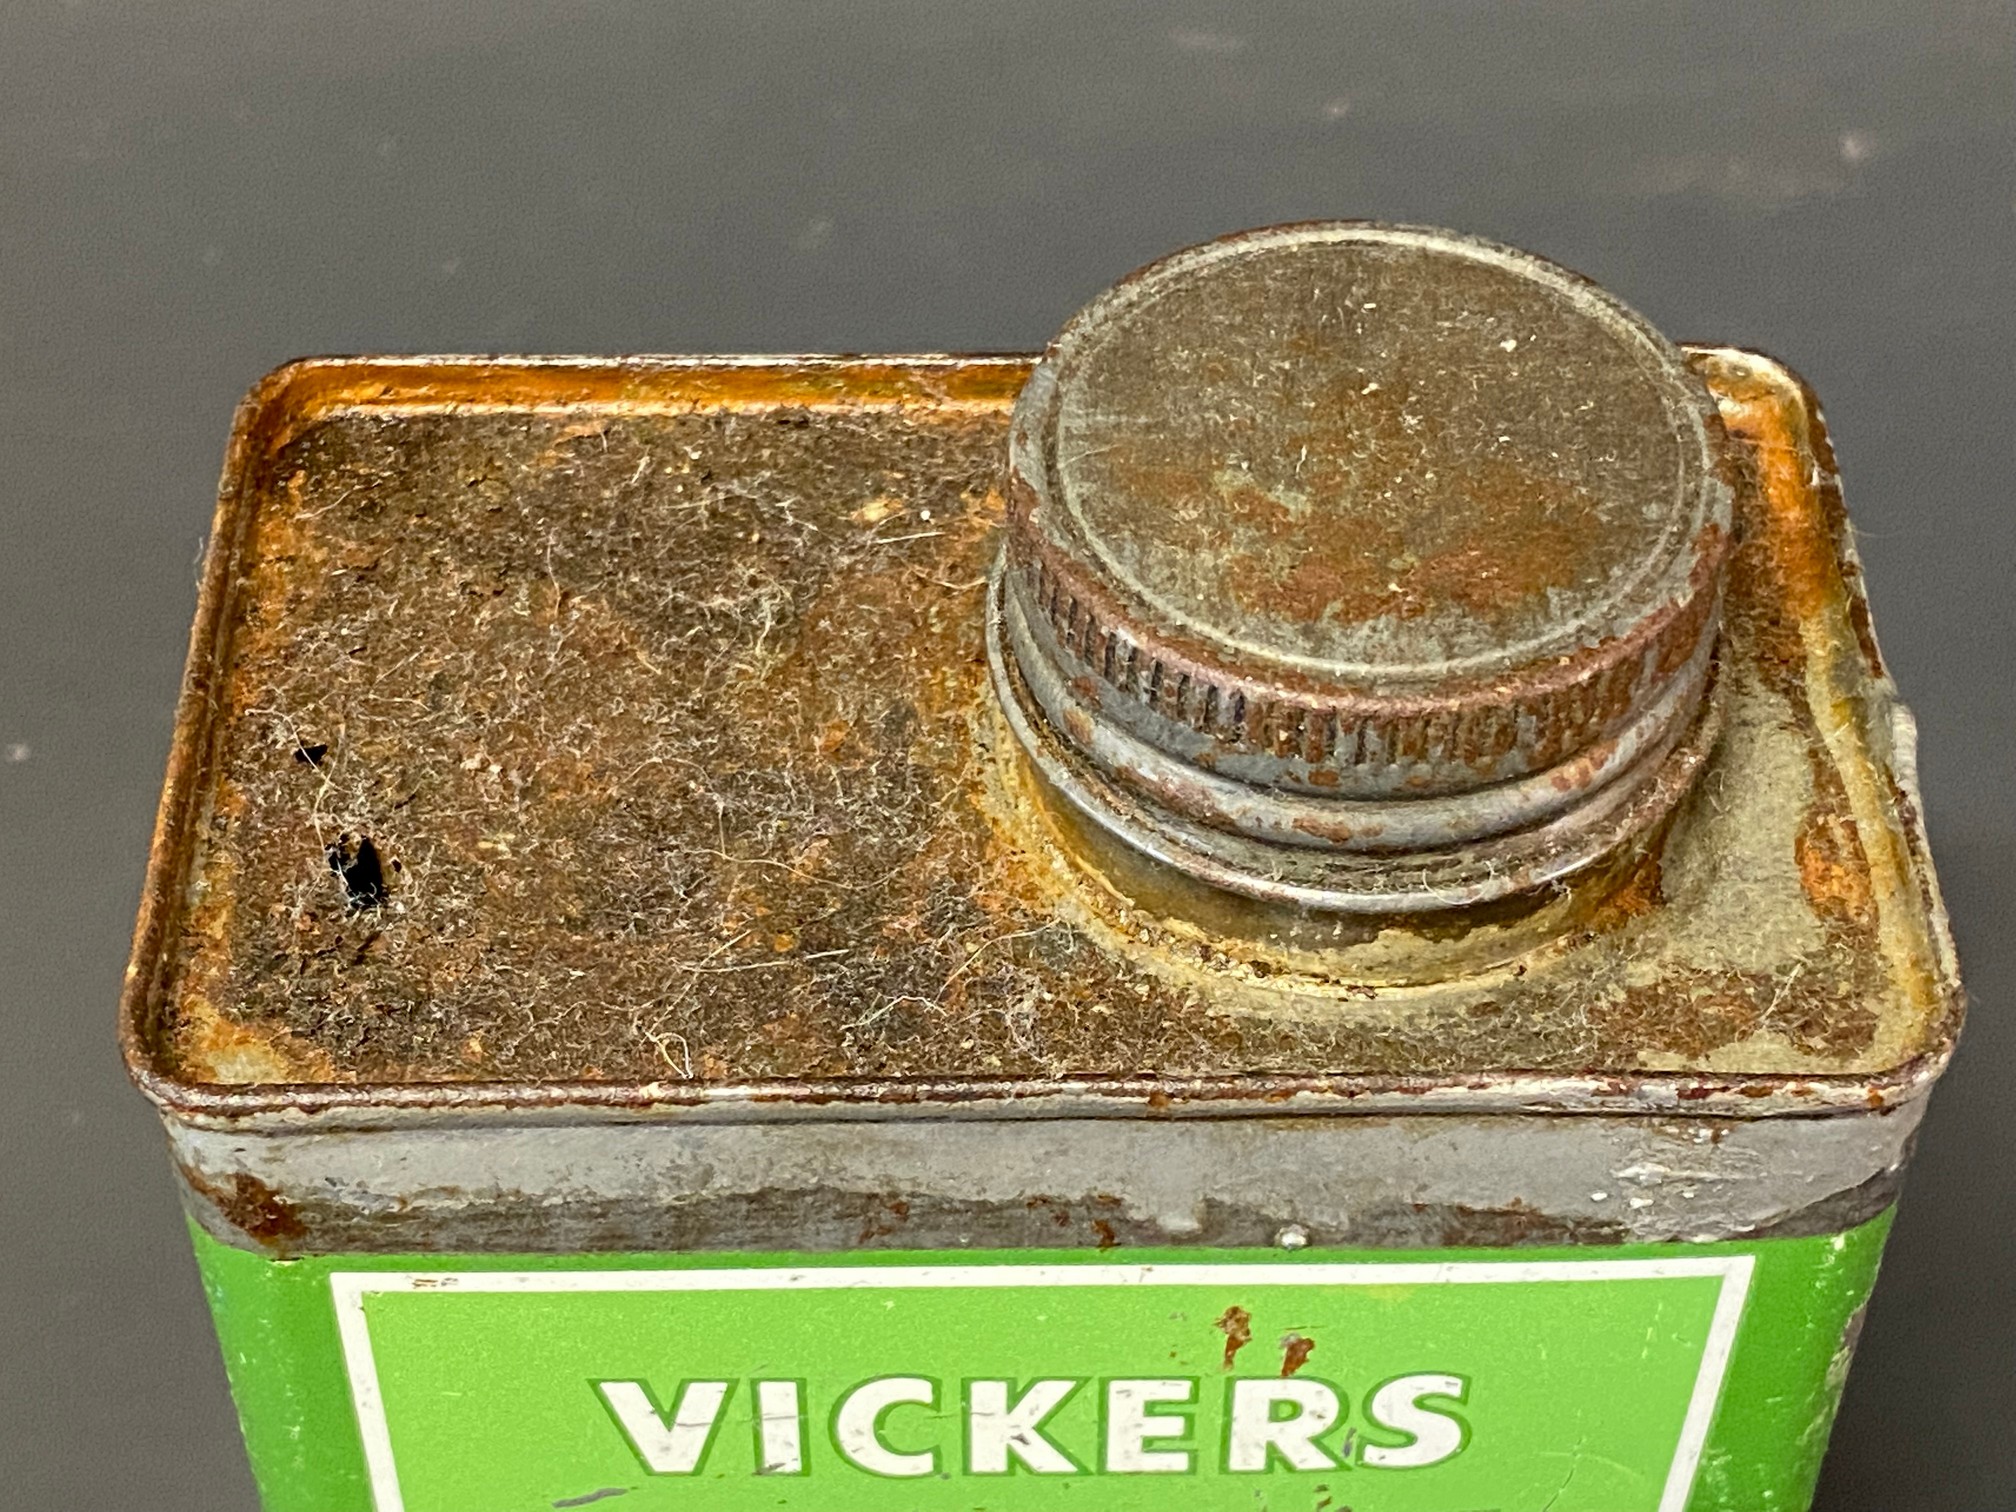 A Vickers Oils rectangular pint can. - Image 5 of 6